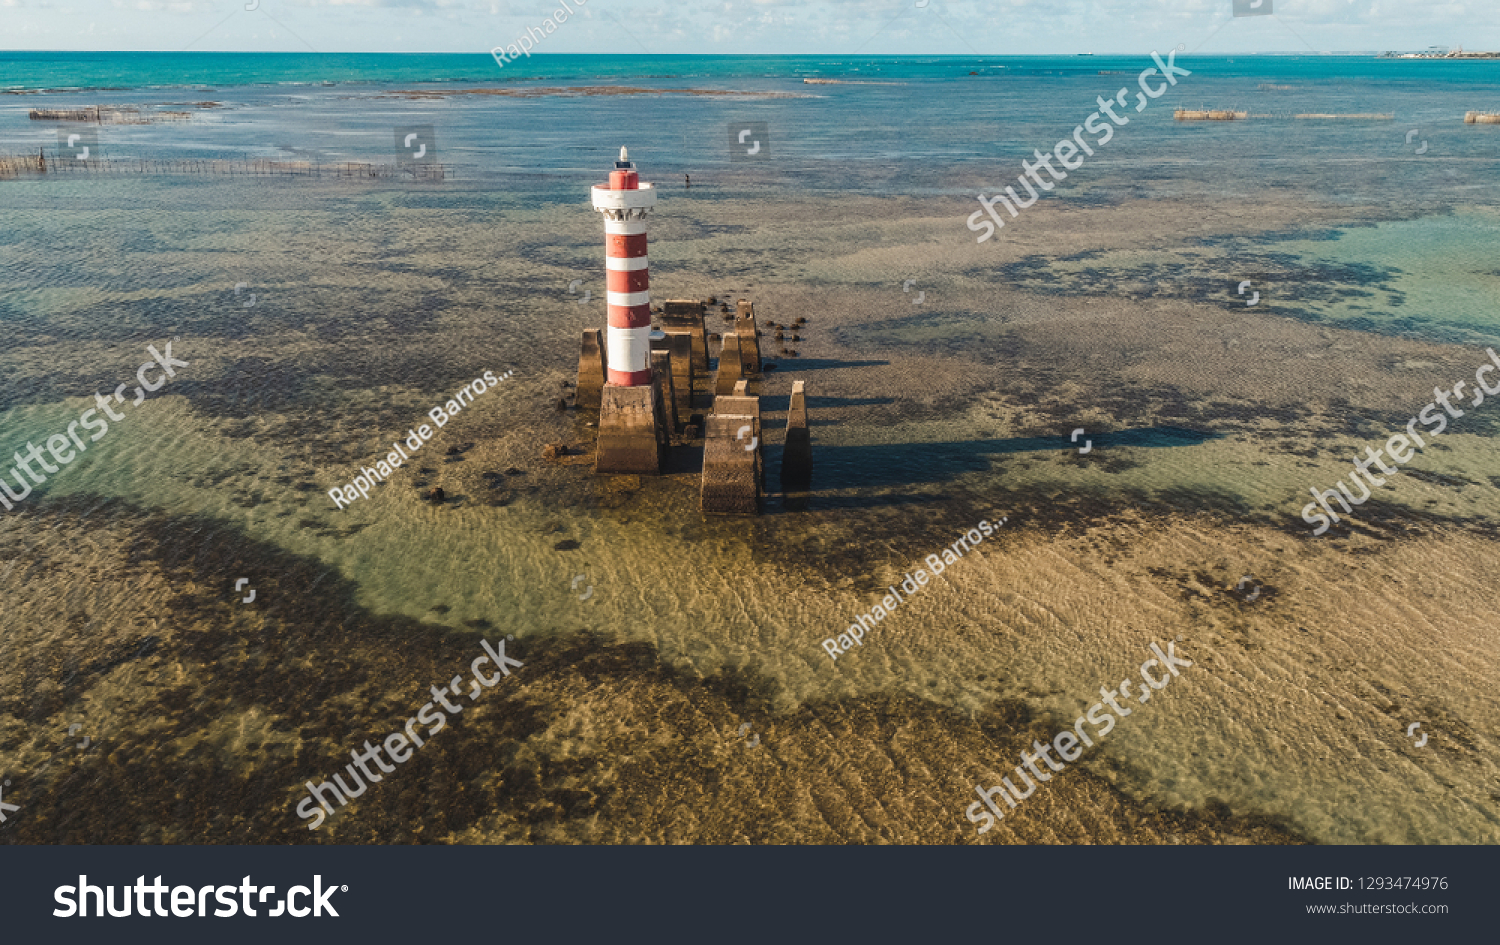 Aerial images of the beach of Maceió Alagoas #1293474976